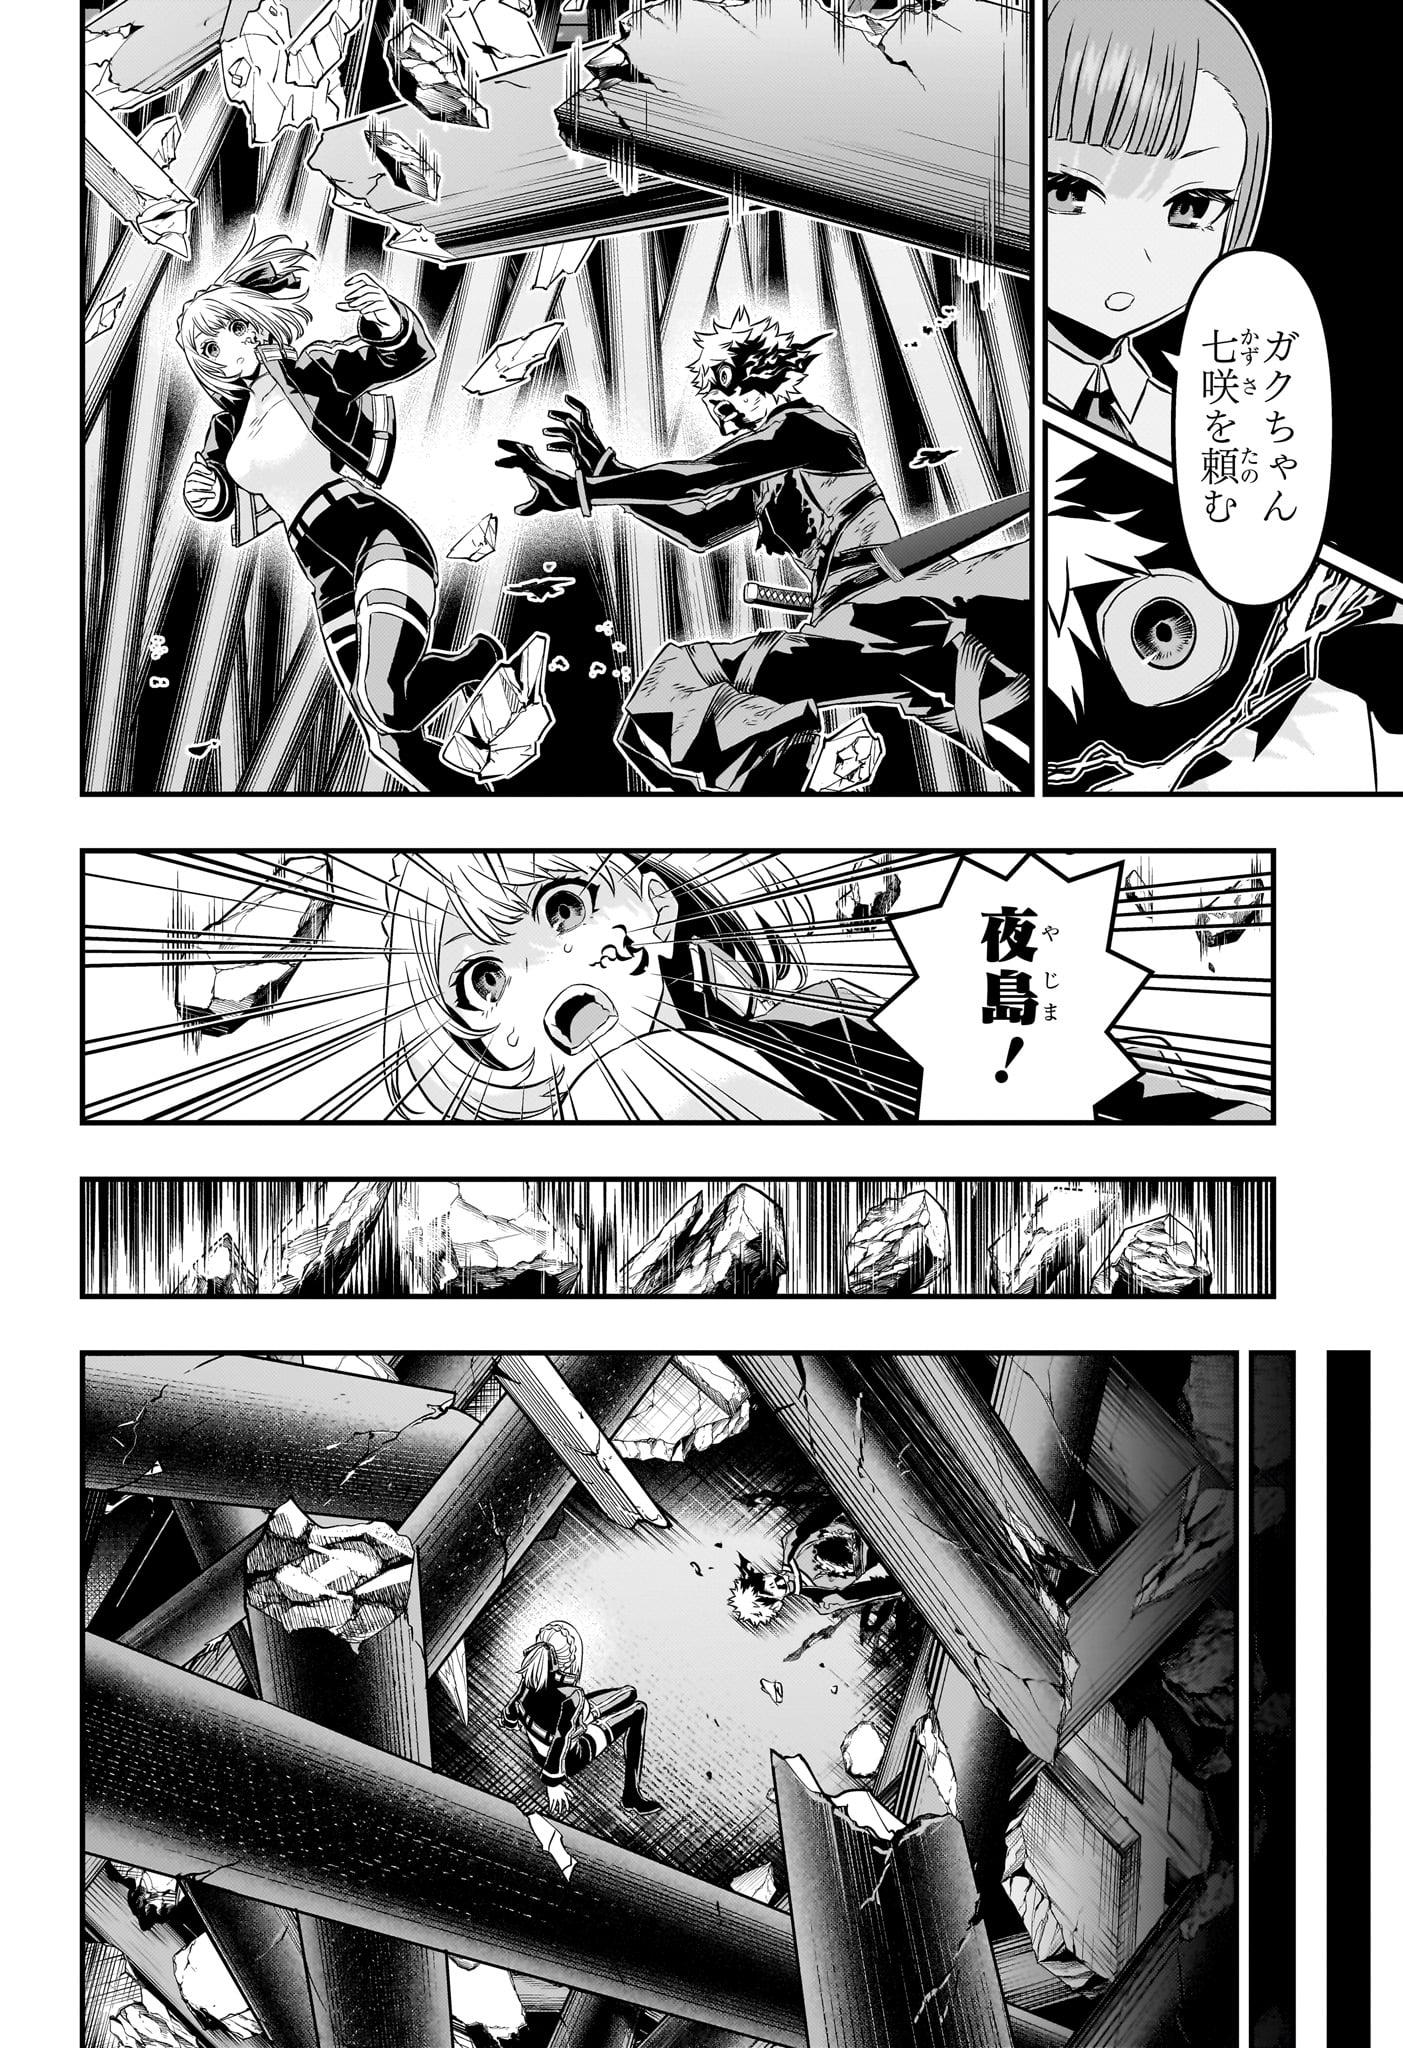 Nue no Onmyouji - Chapter 57 - Page 8